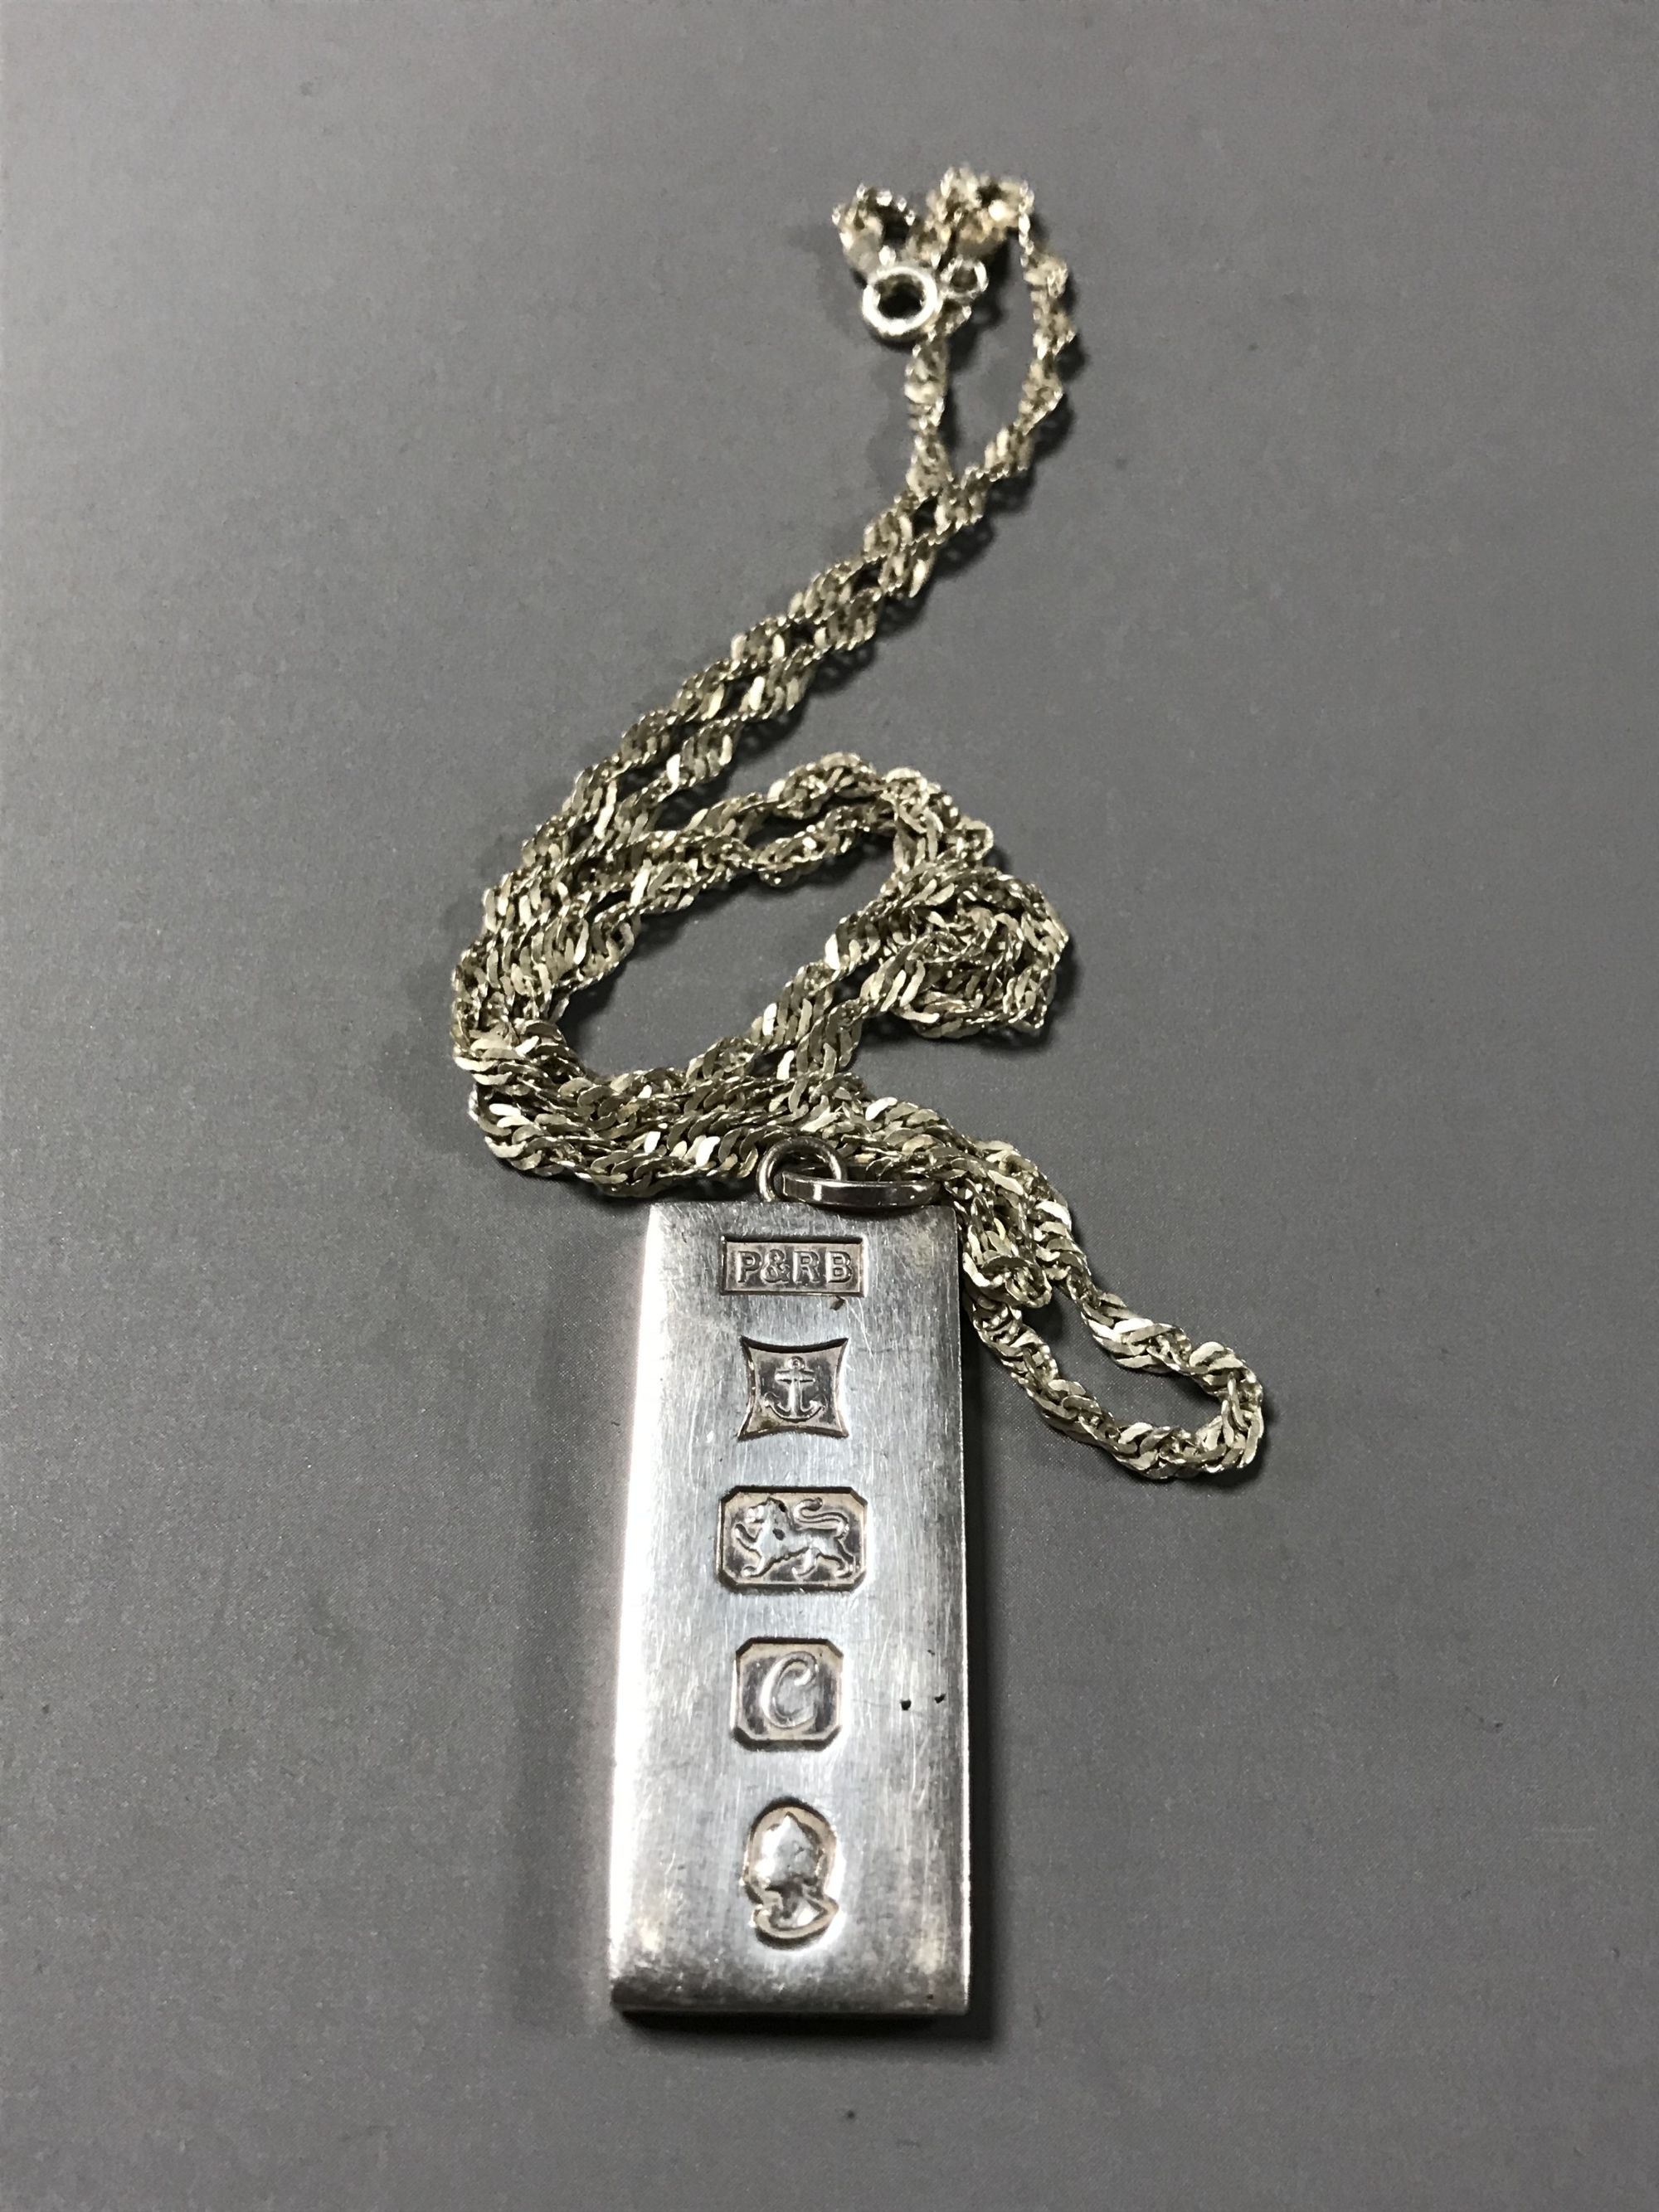 A silver ingot on sterling silver chain